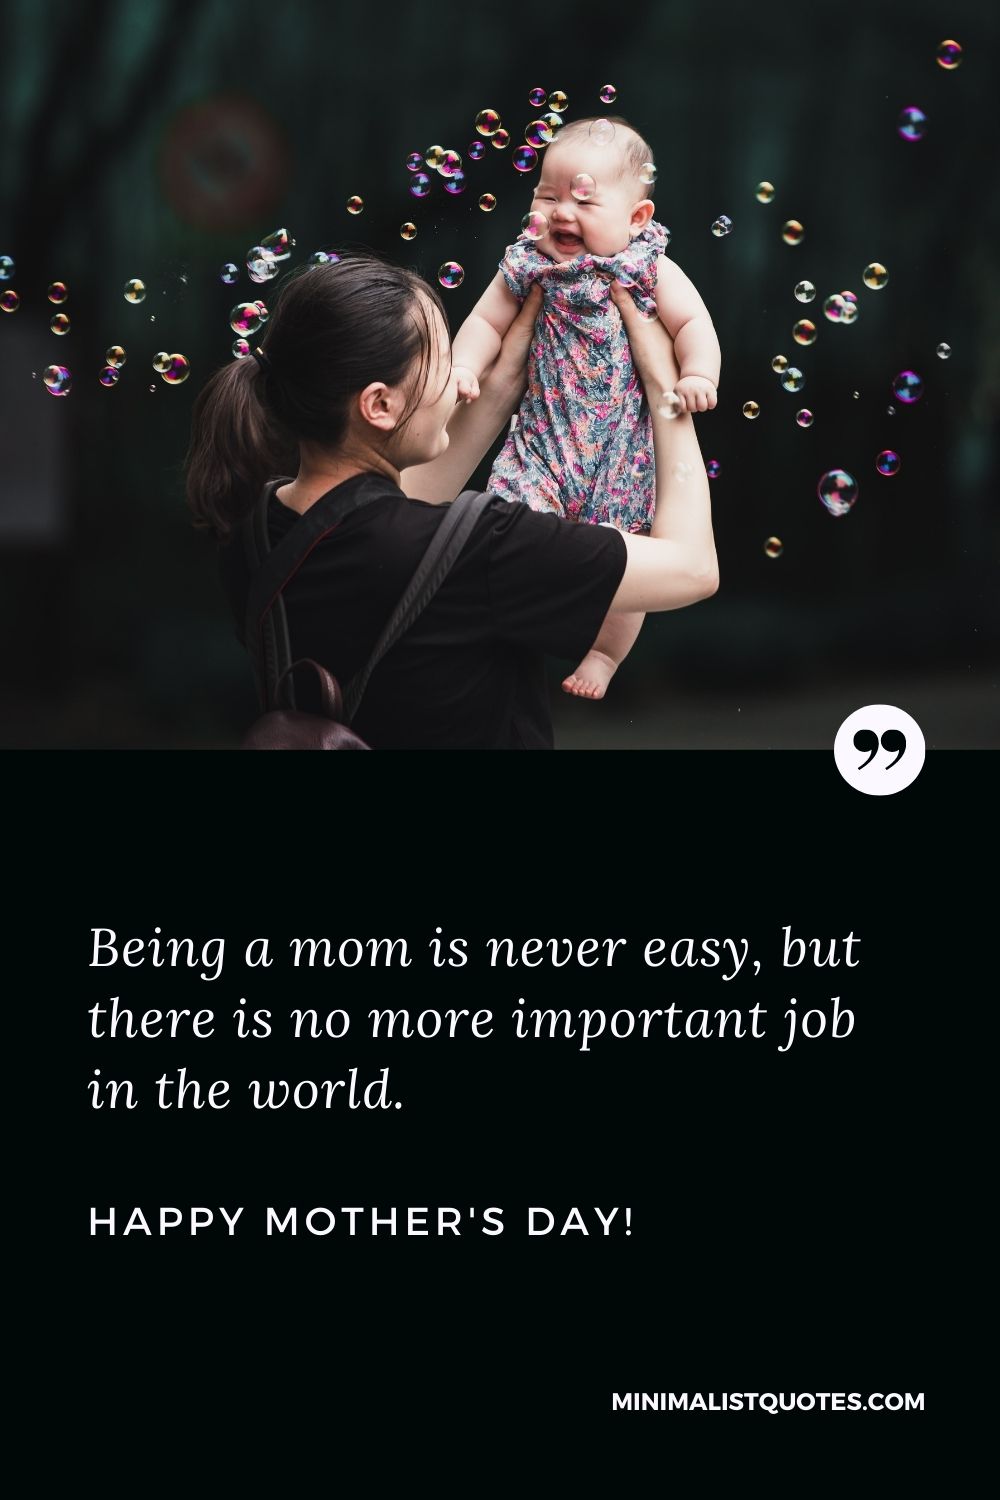 Mothers to all world happy day moms in the